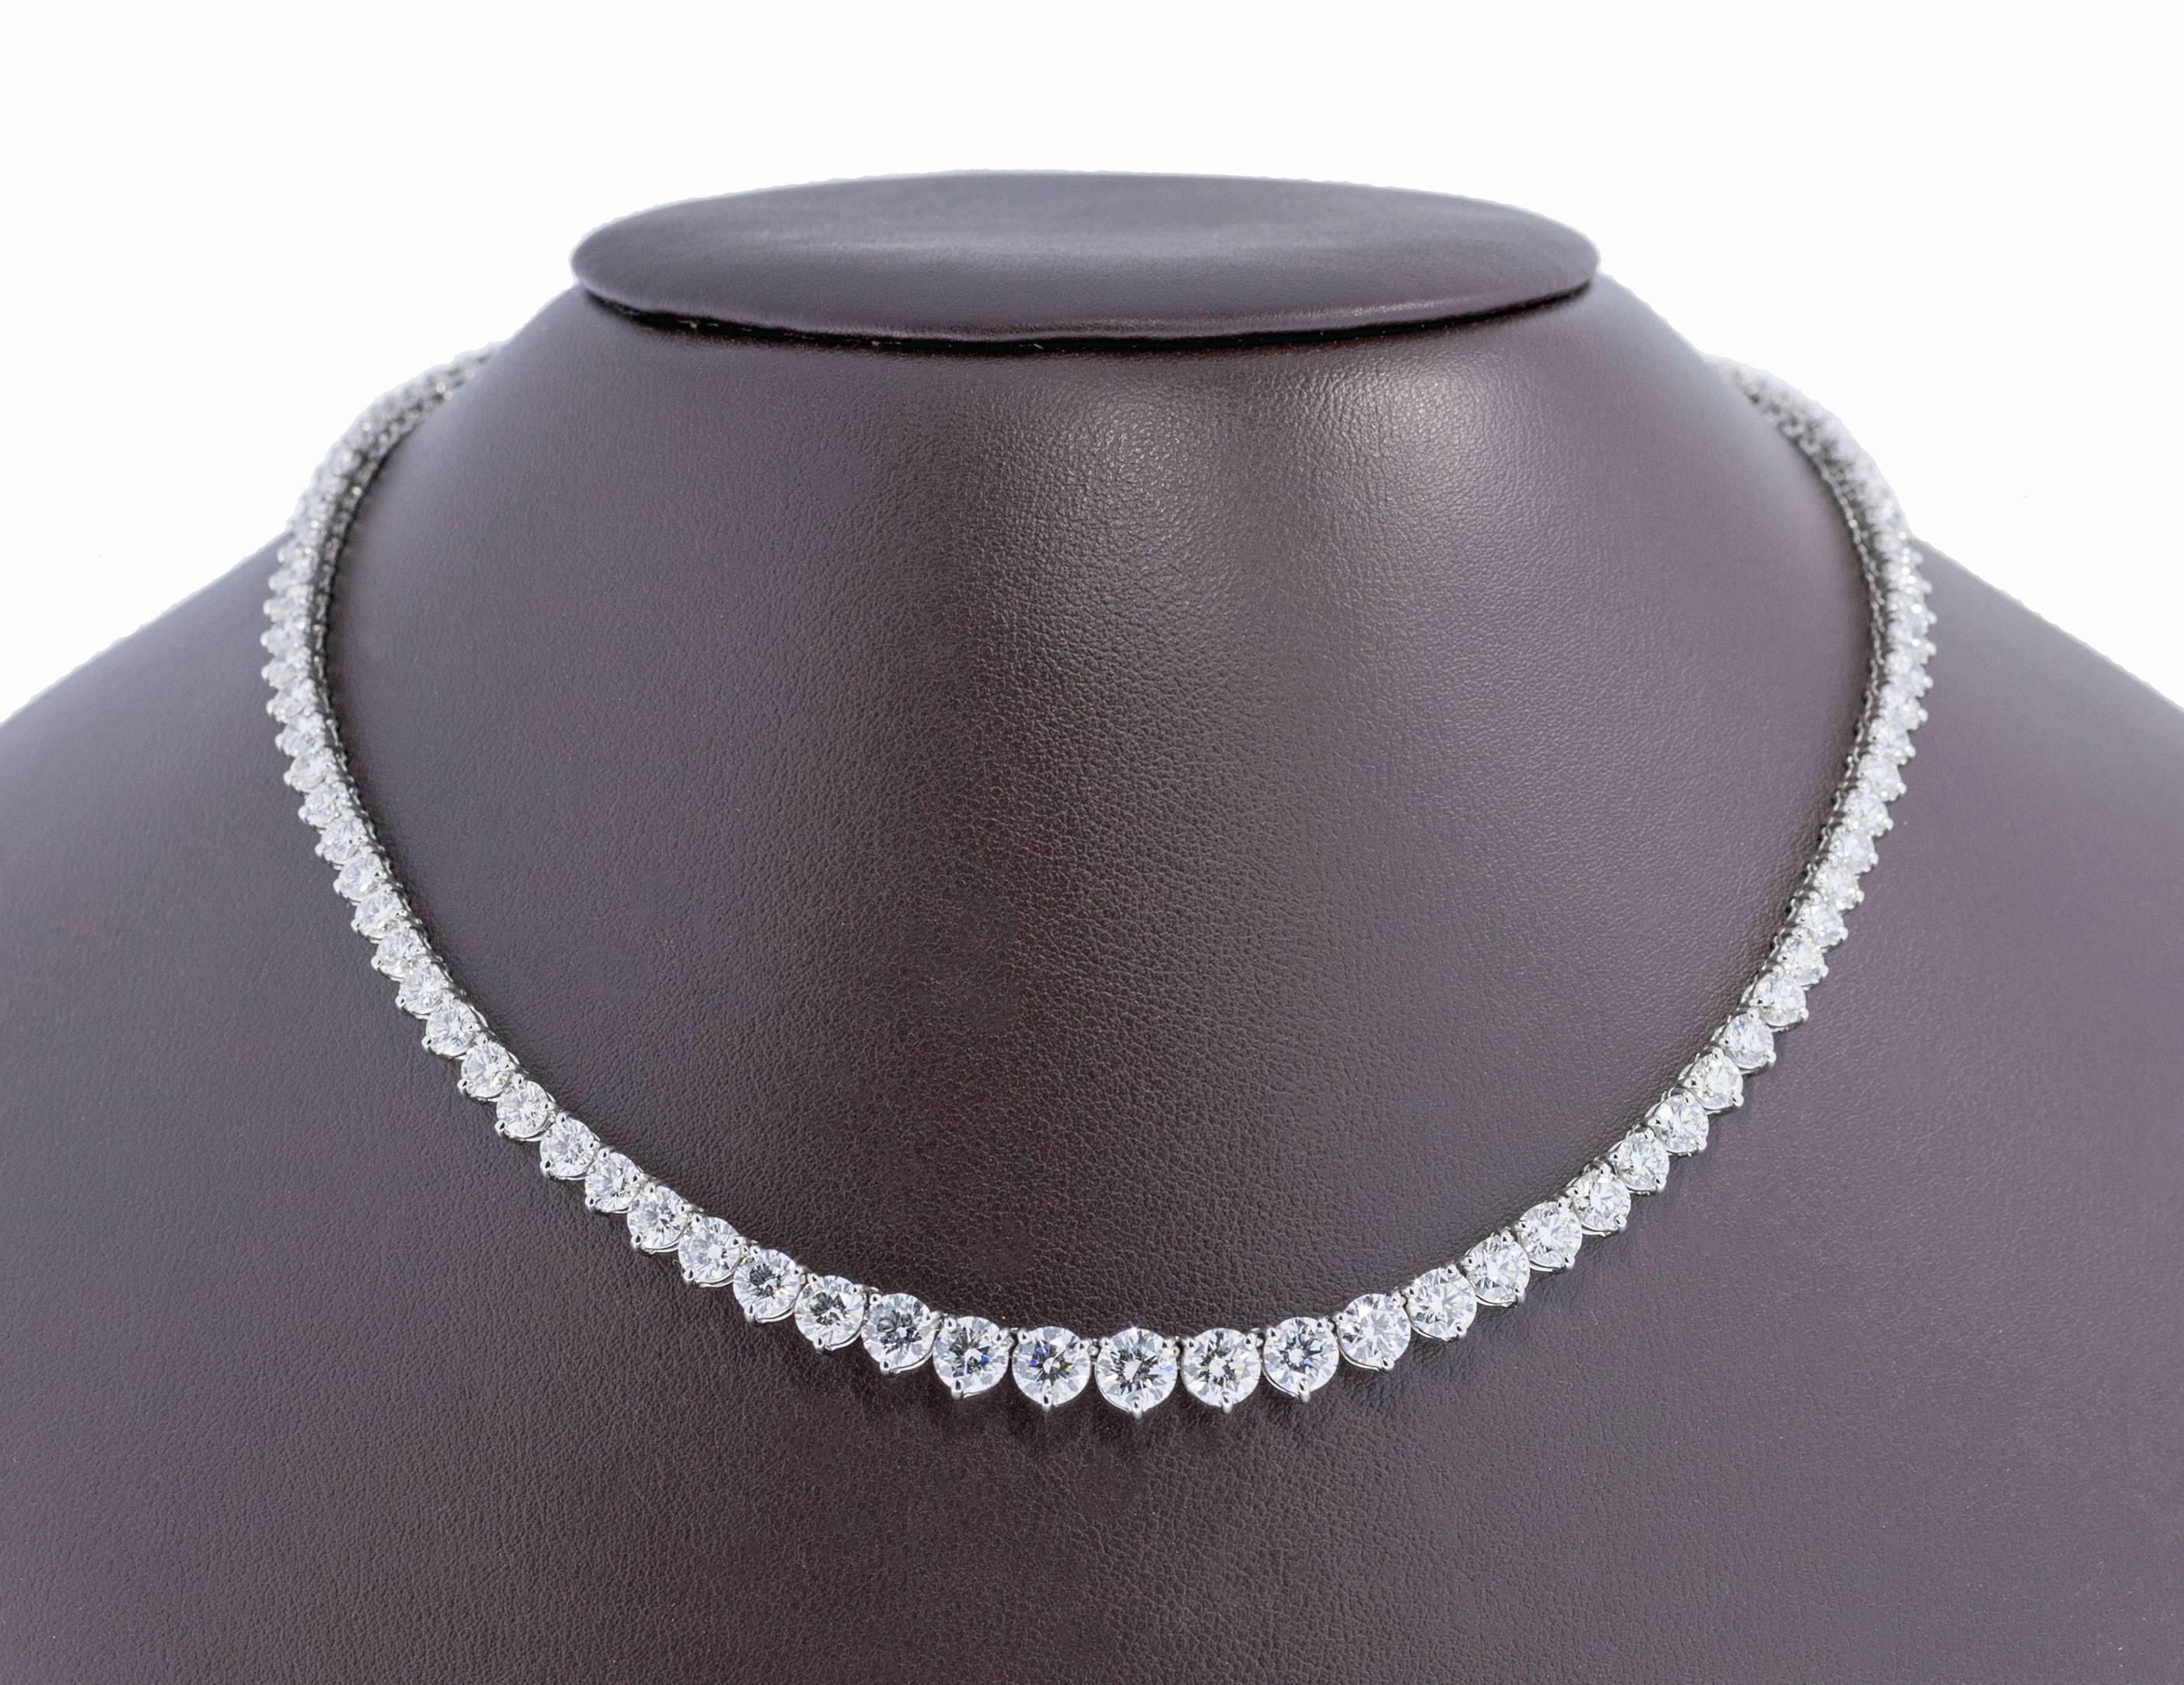 This gorgeous necklace will simply take your breath away! It features a 101 natural round brilliant cut diamonds that have a combined total weight of approximately 21 carats. These sparkling diamonds conservatively grade as GH/VS1-SI1 in quality.